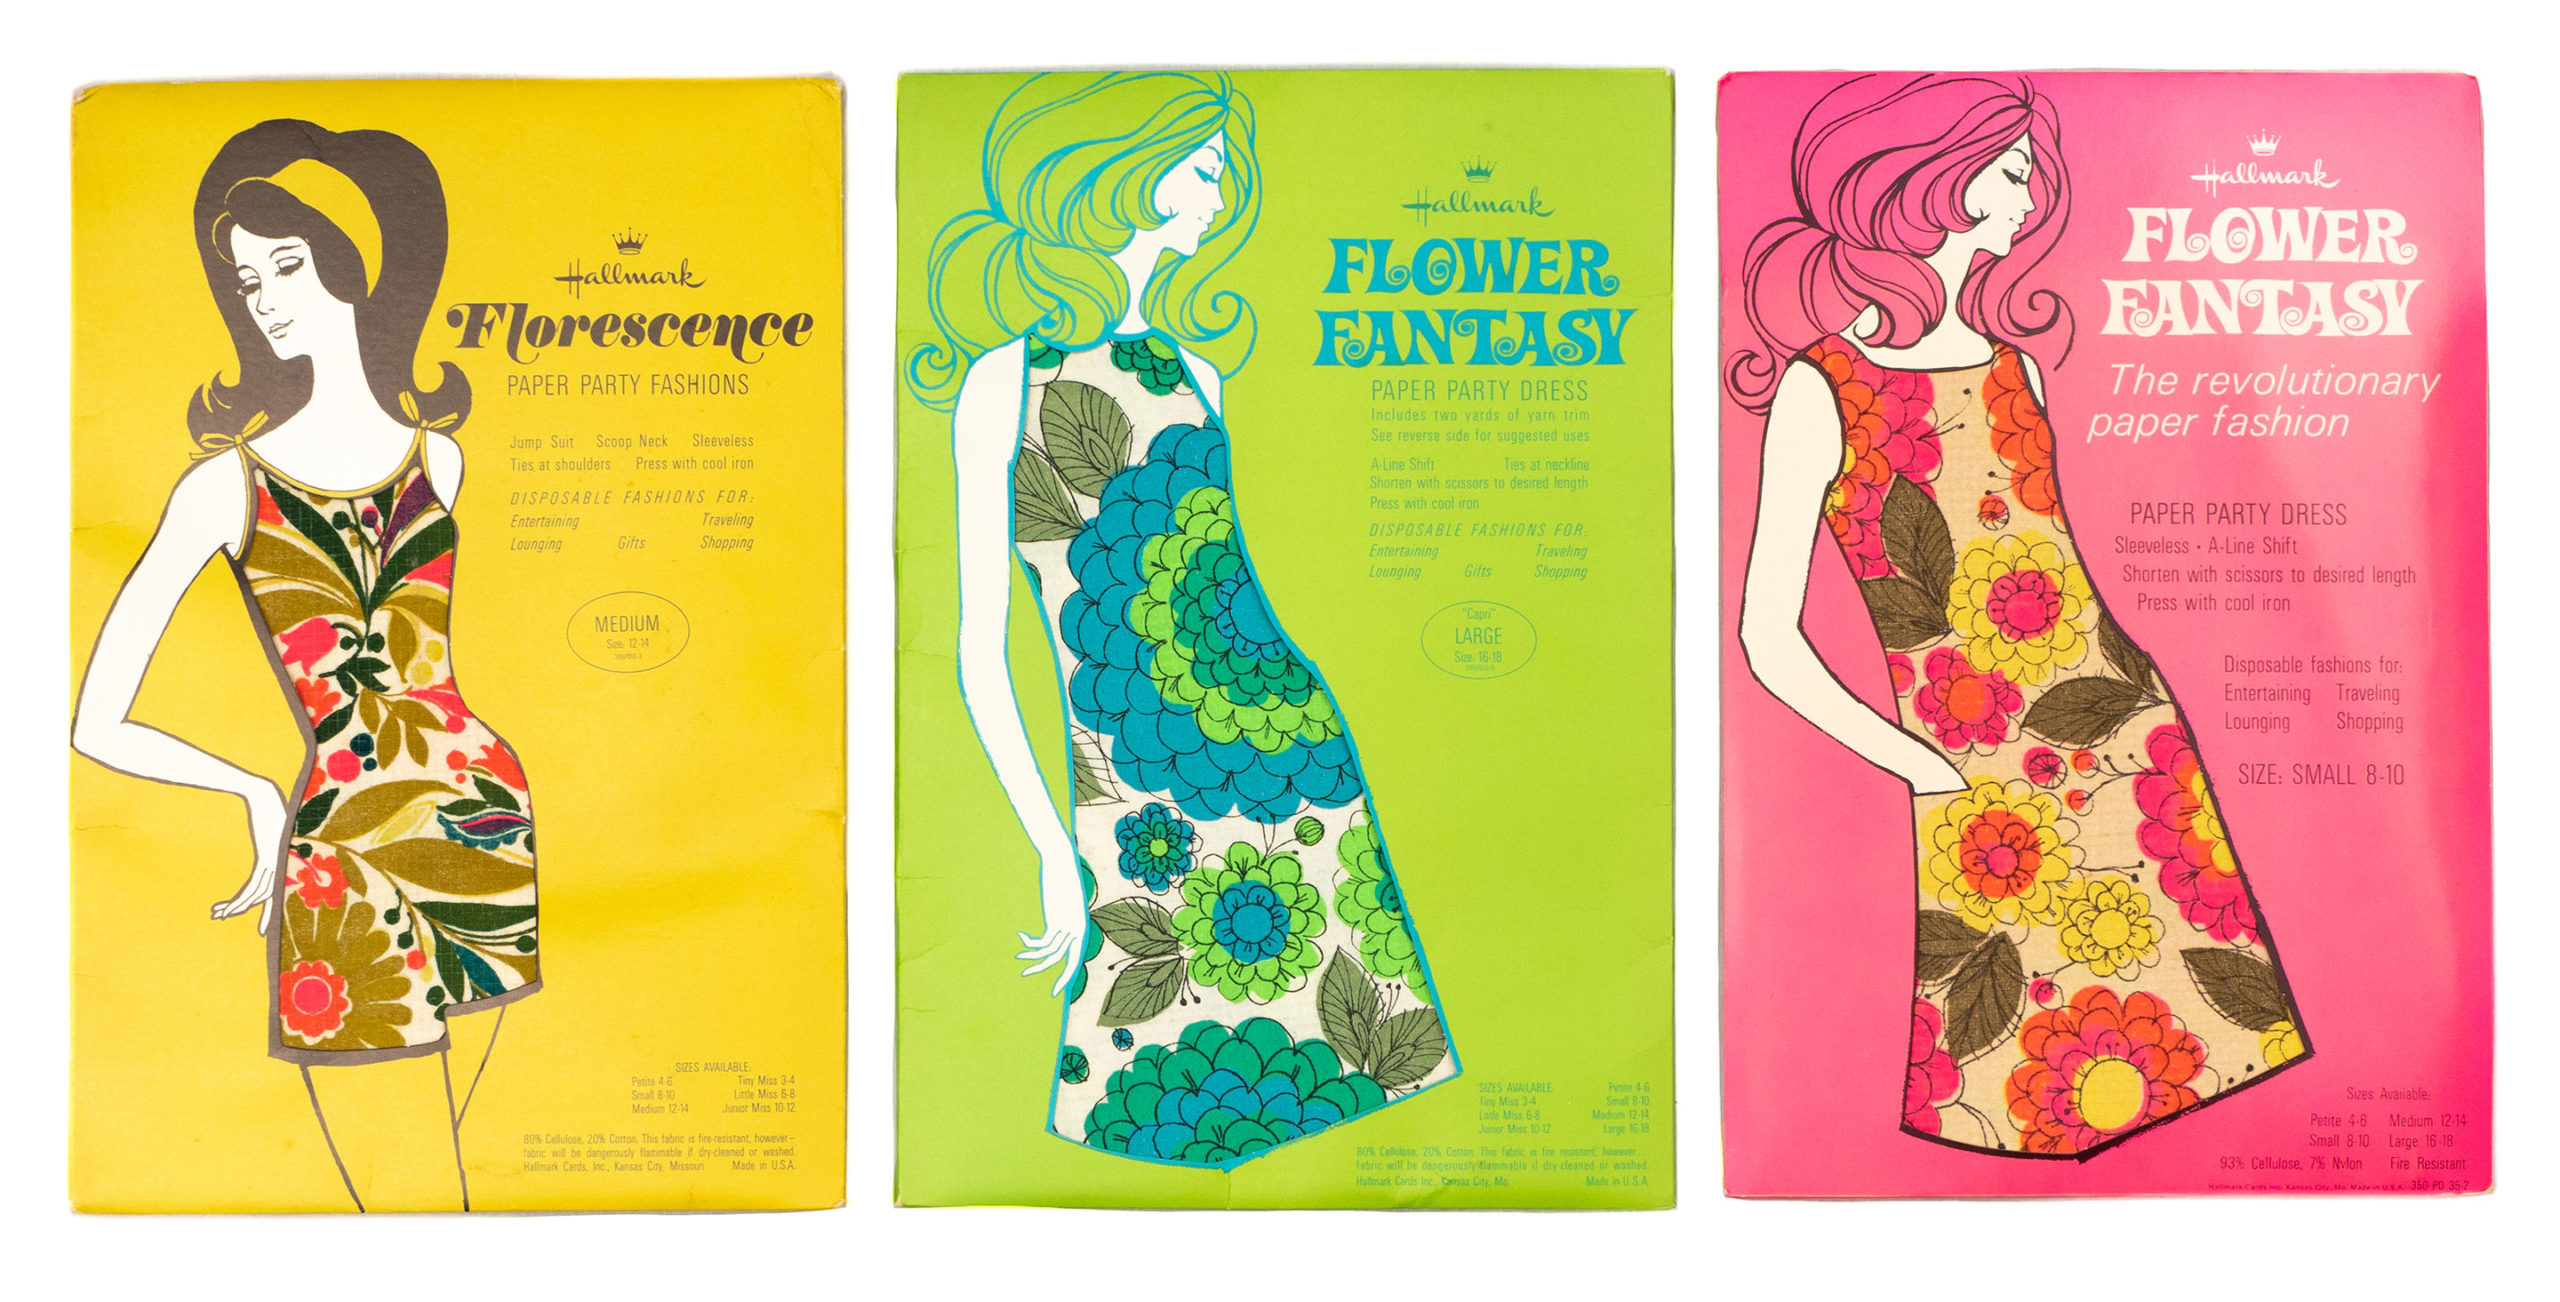 Hallmark, Rompers, c. 1967. Printed 80% Cellulose and 20% cotton paper. Collection of Phoenix Art Museum, Promised gift of Kelly Ellman. Image © Phoenix Art Museum.